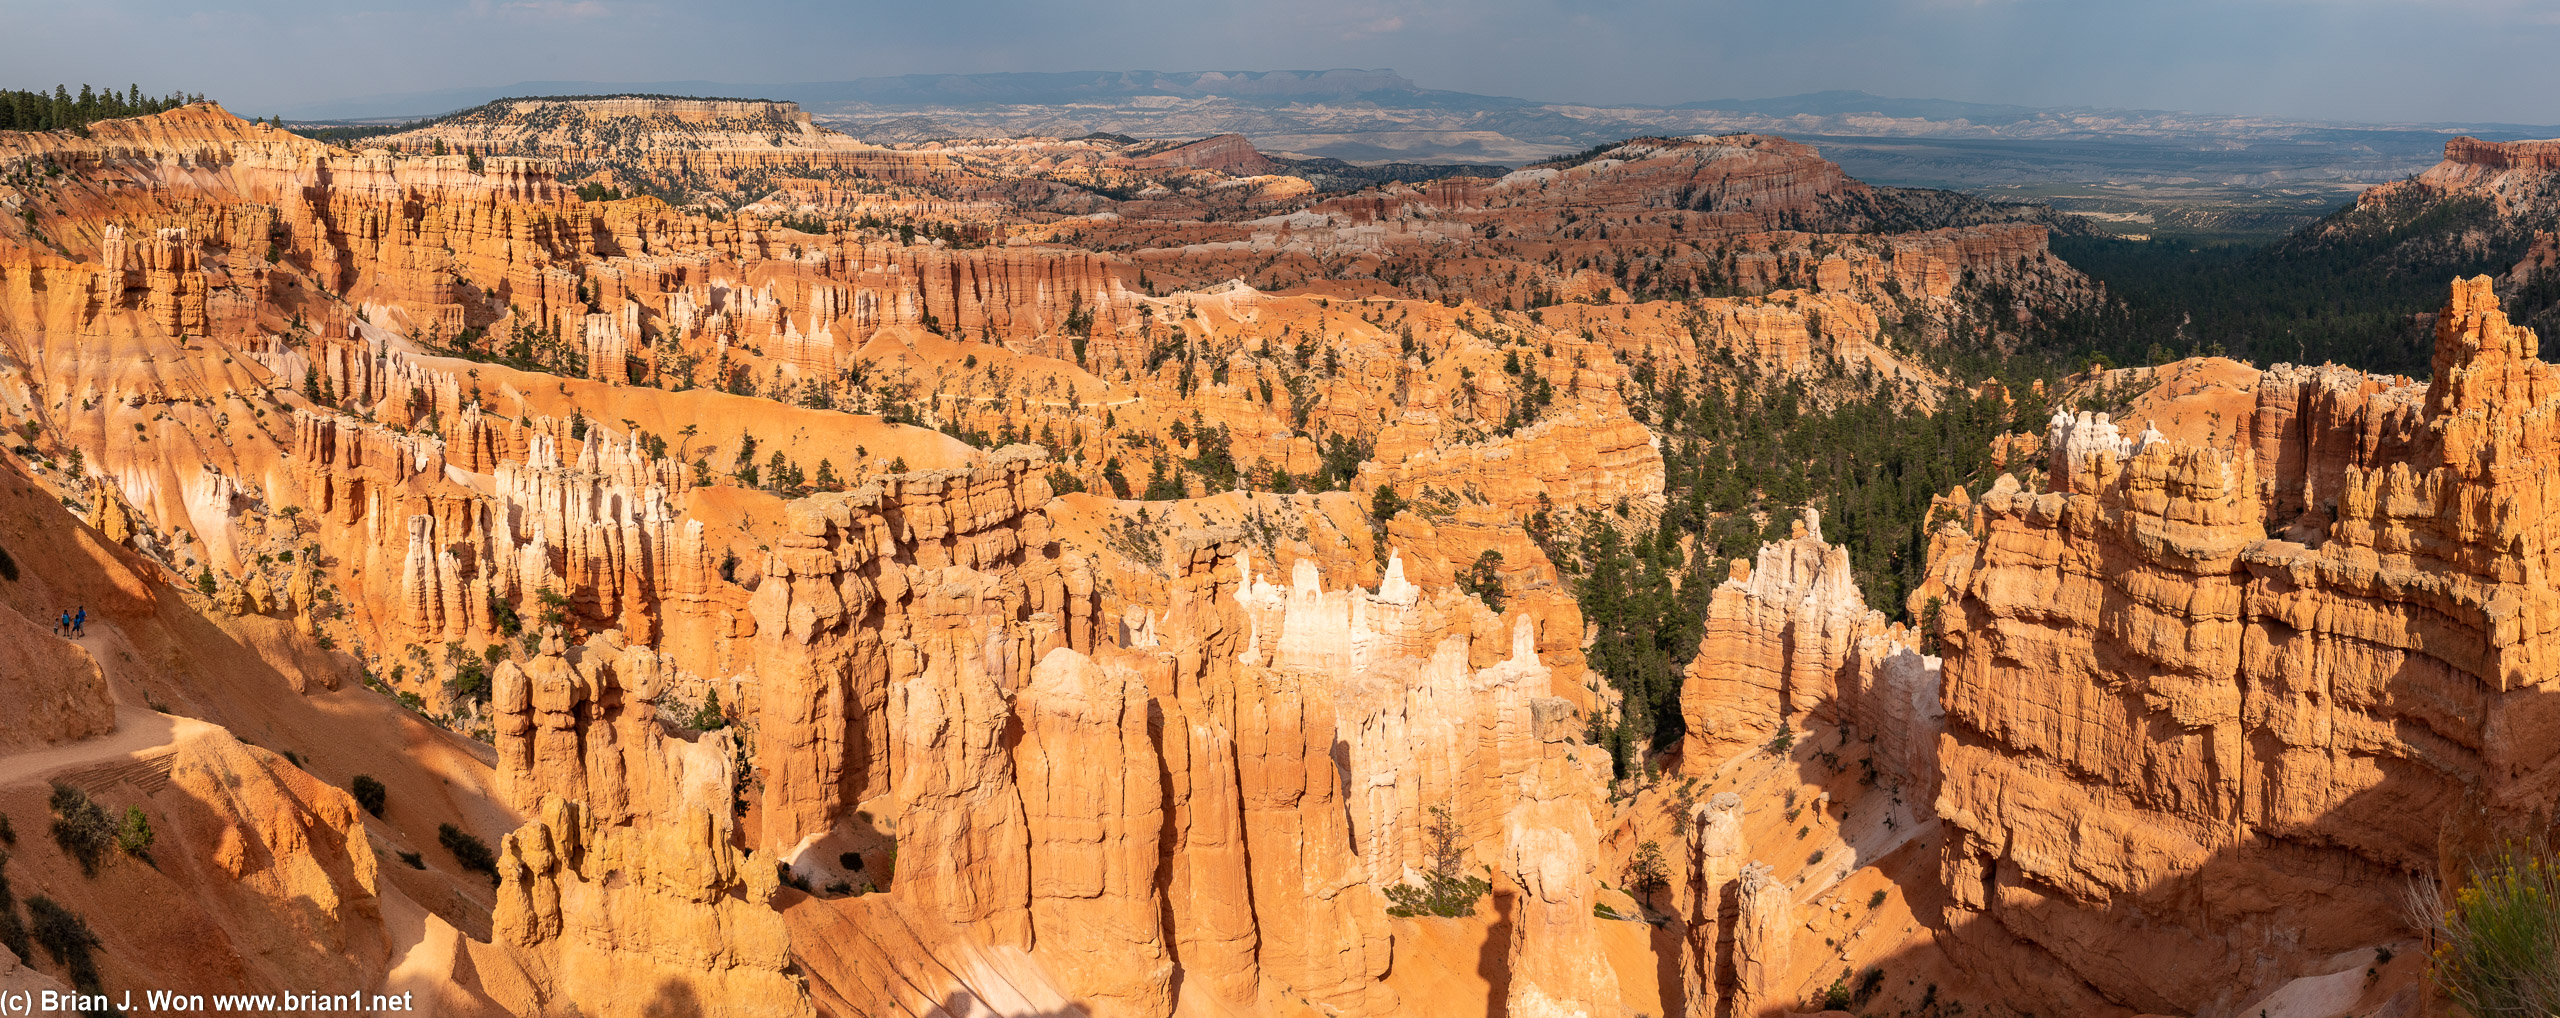 Bryce Canyon Ampitheater shines in the sunlight.